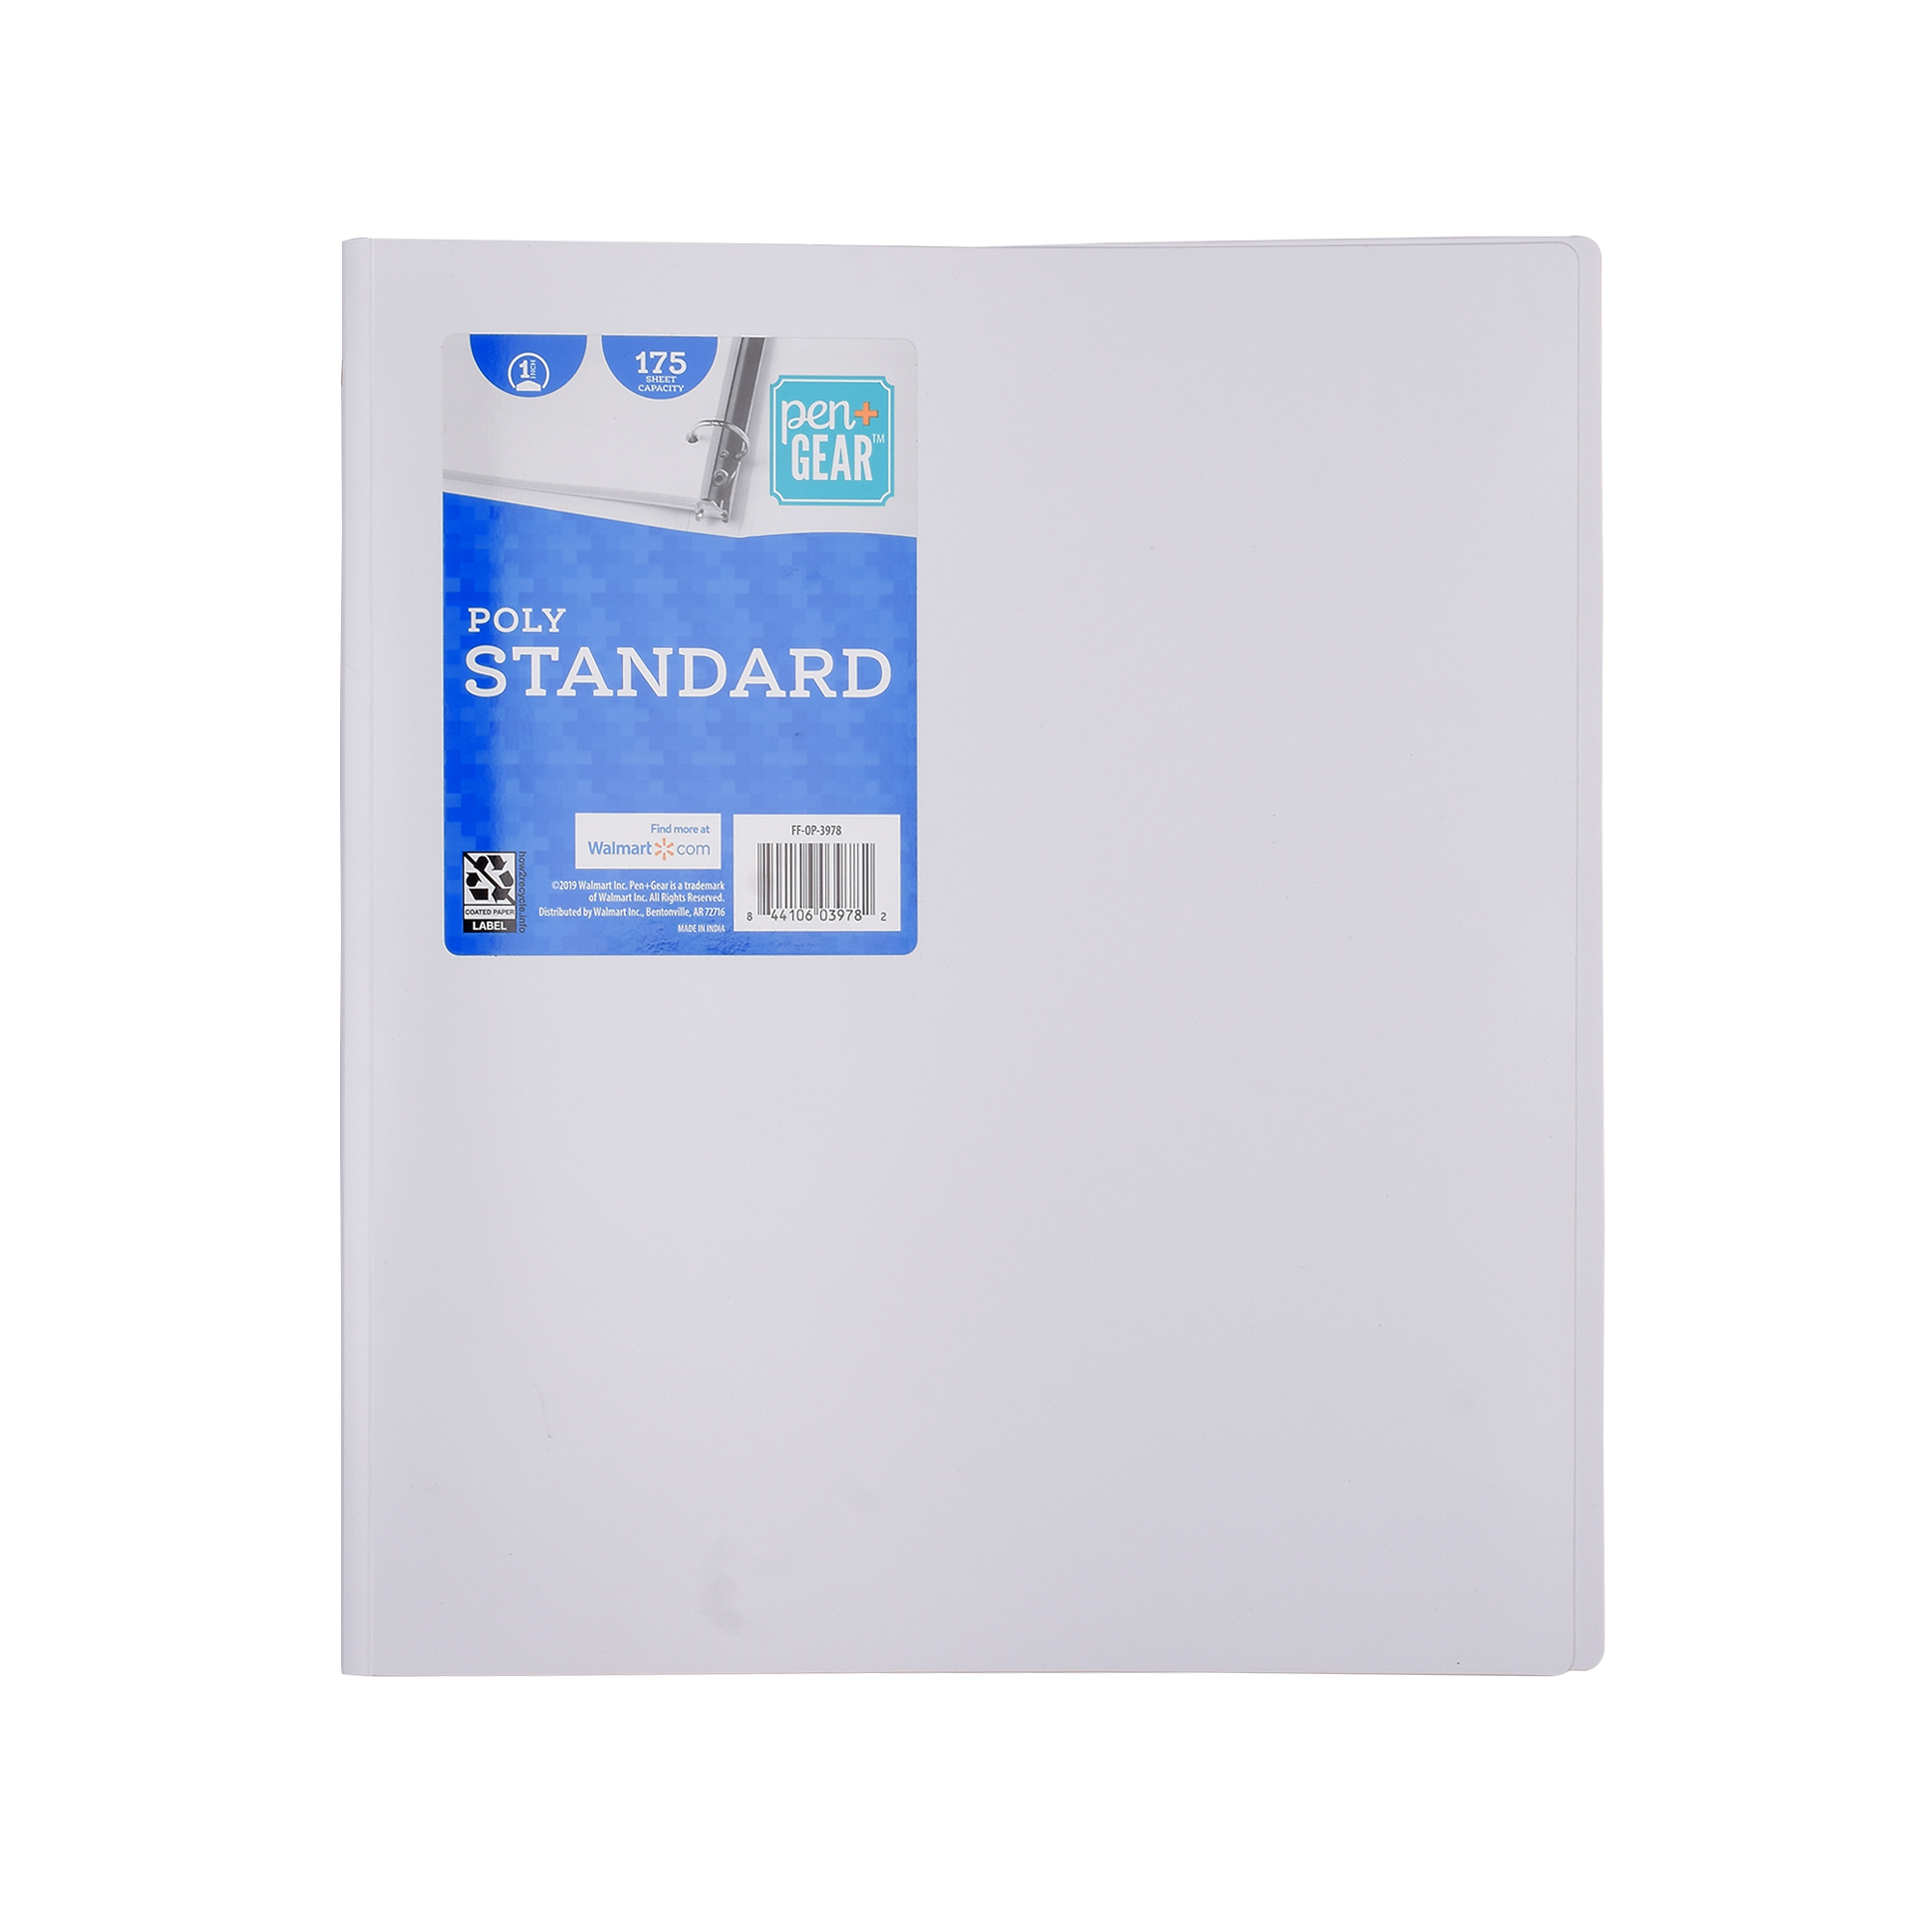 Pen + Gear 1" Standard 3-Ring Poly Binder, White Color, 1 inch "O Ring", Letter Size - image 1 of 5